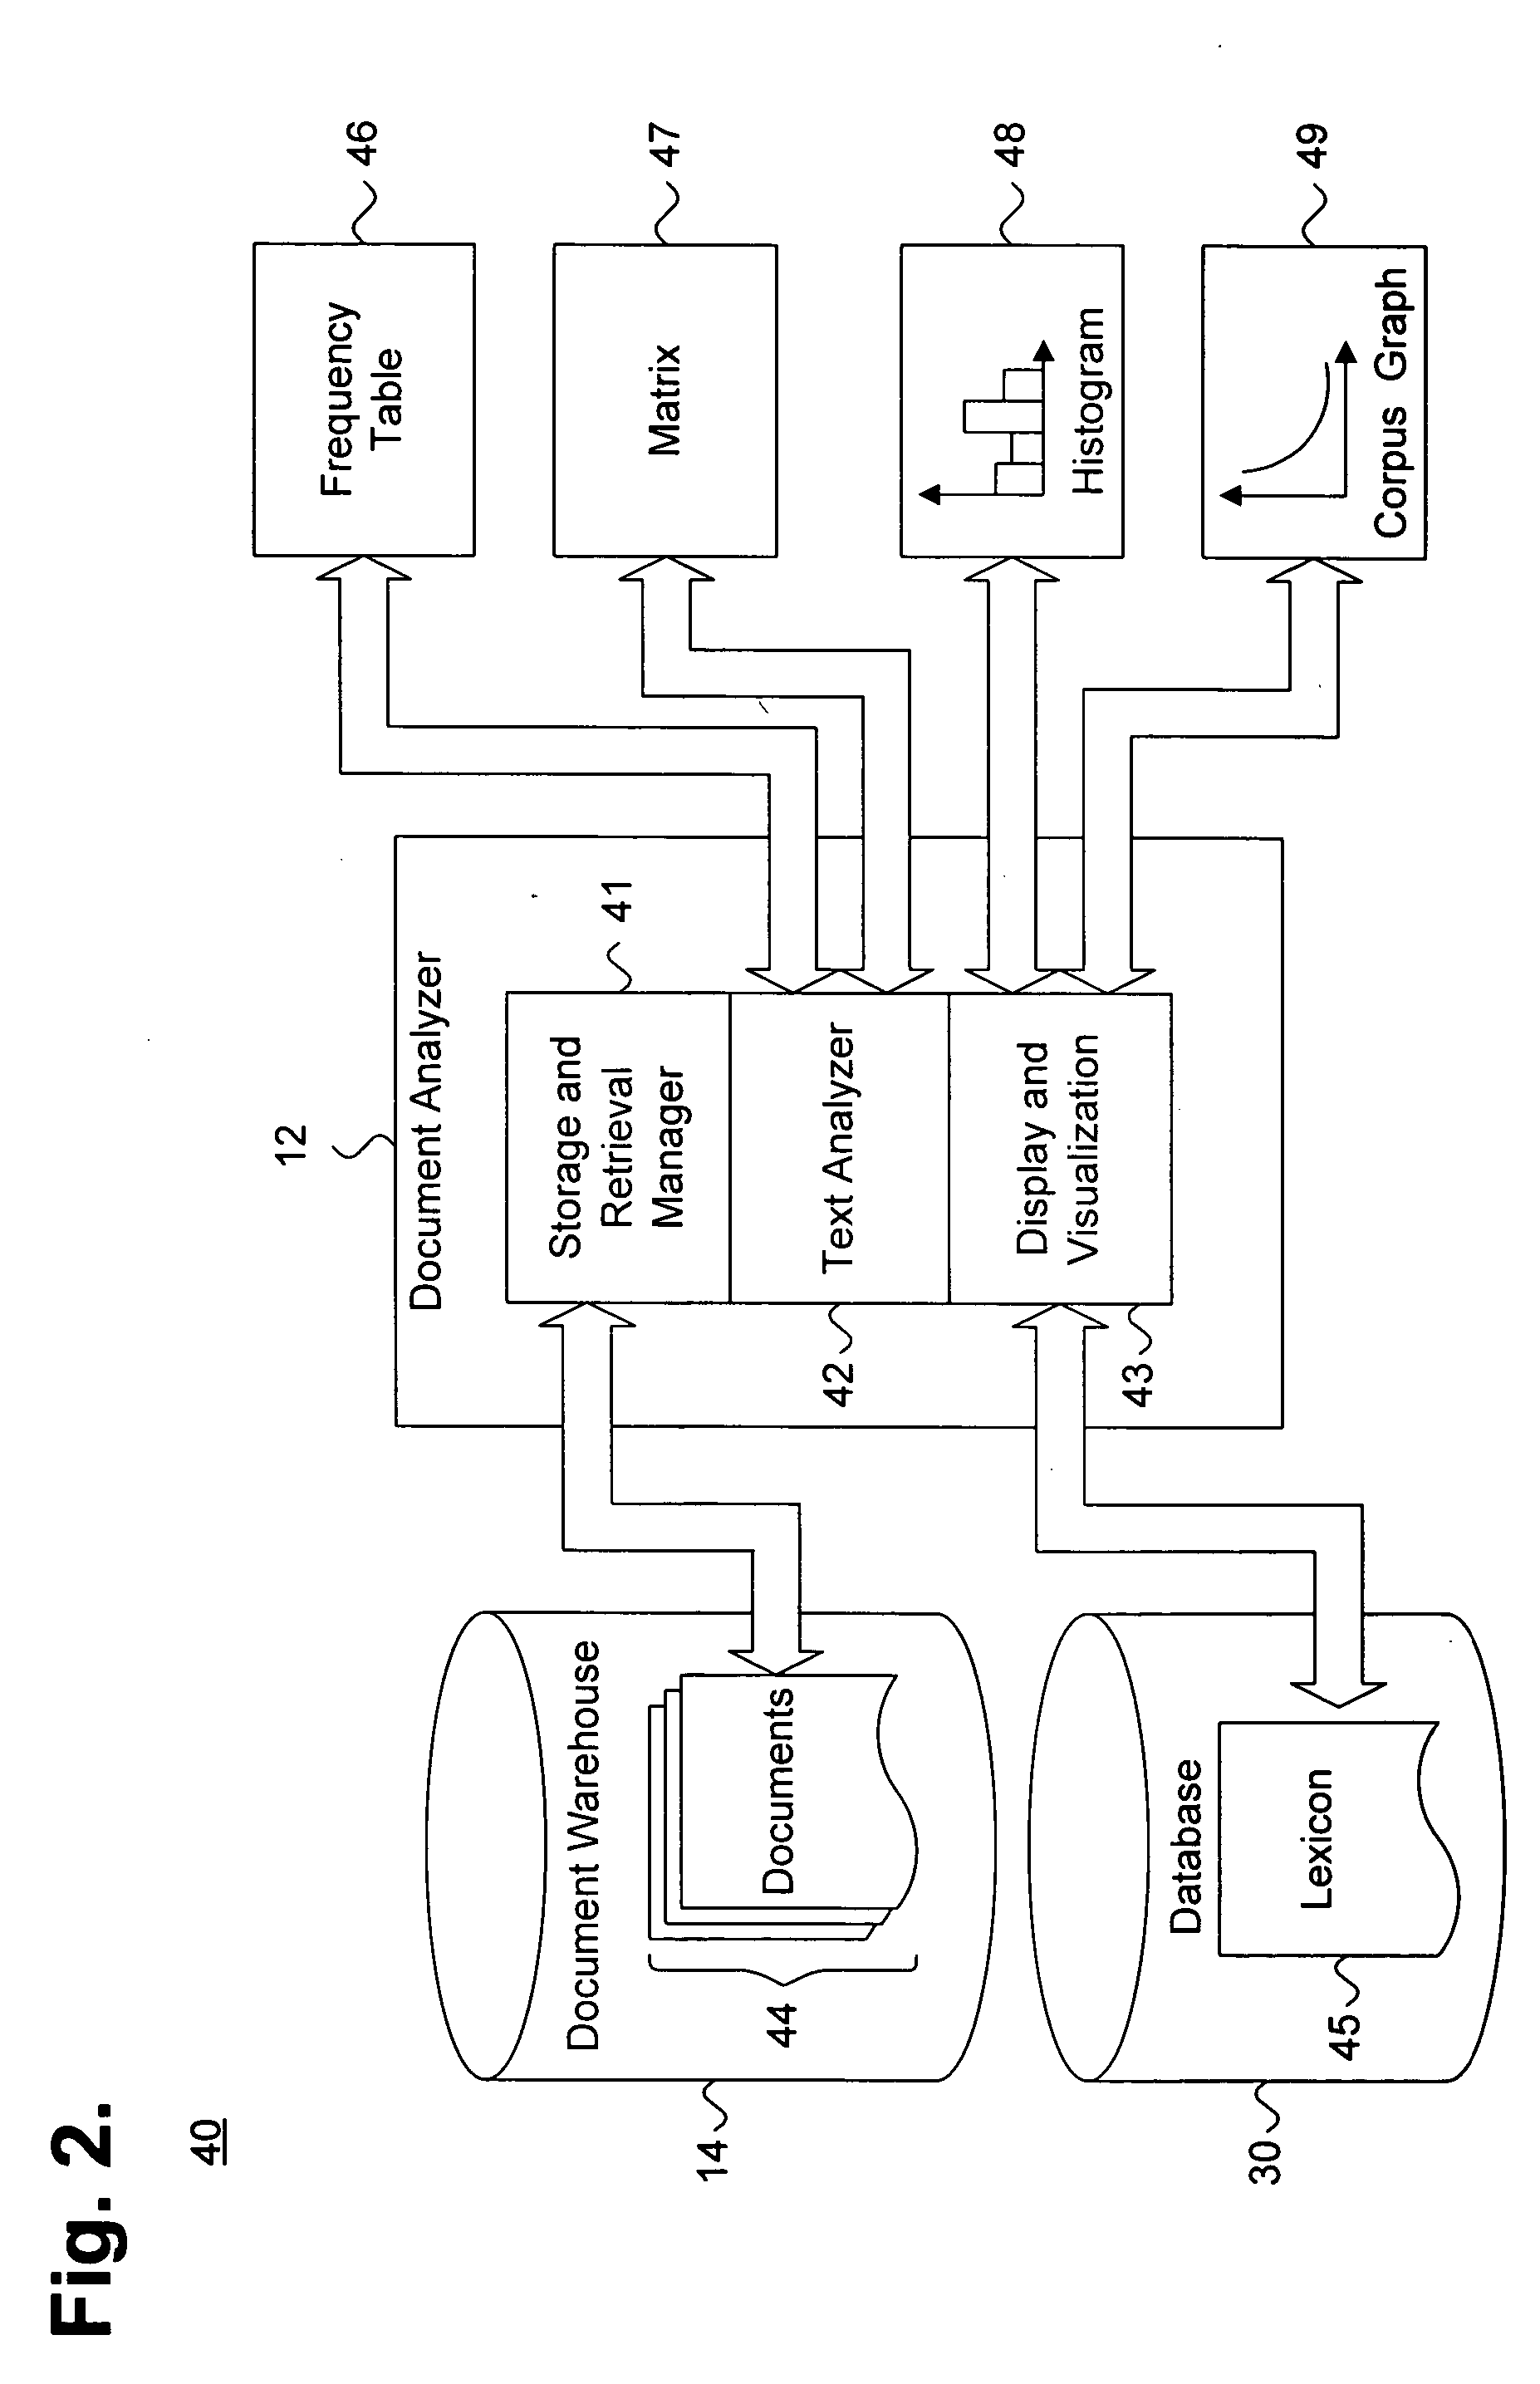 System and method for dynamically evaluating latent concepts in unstructured documents